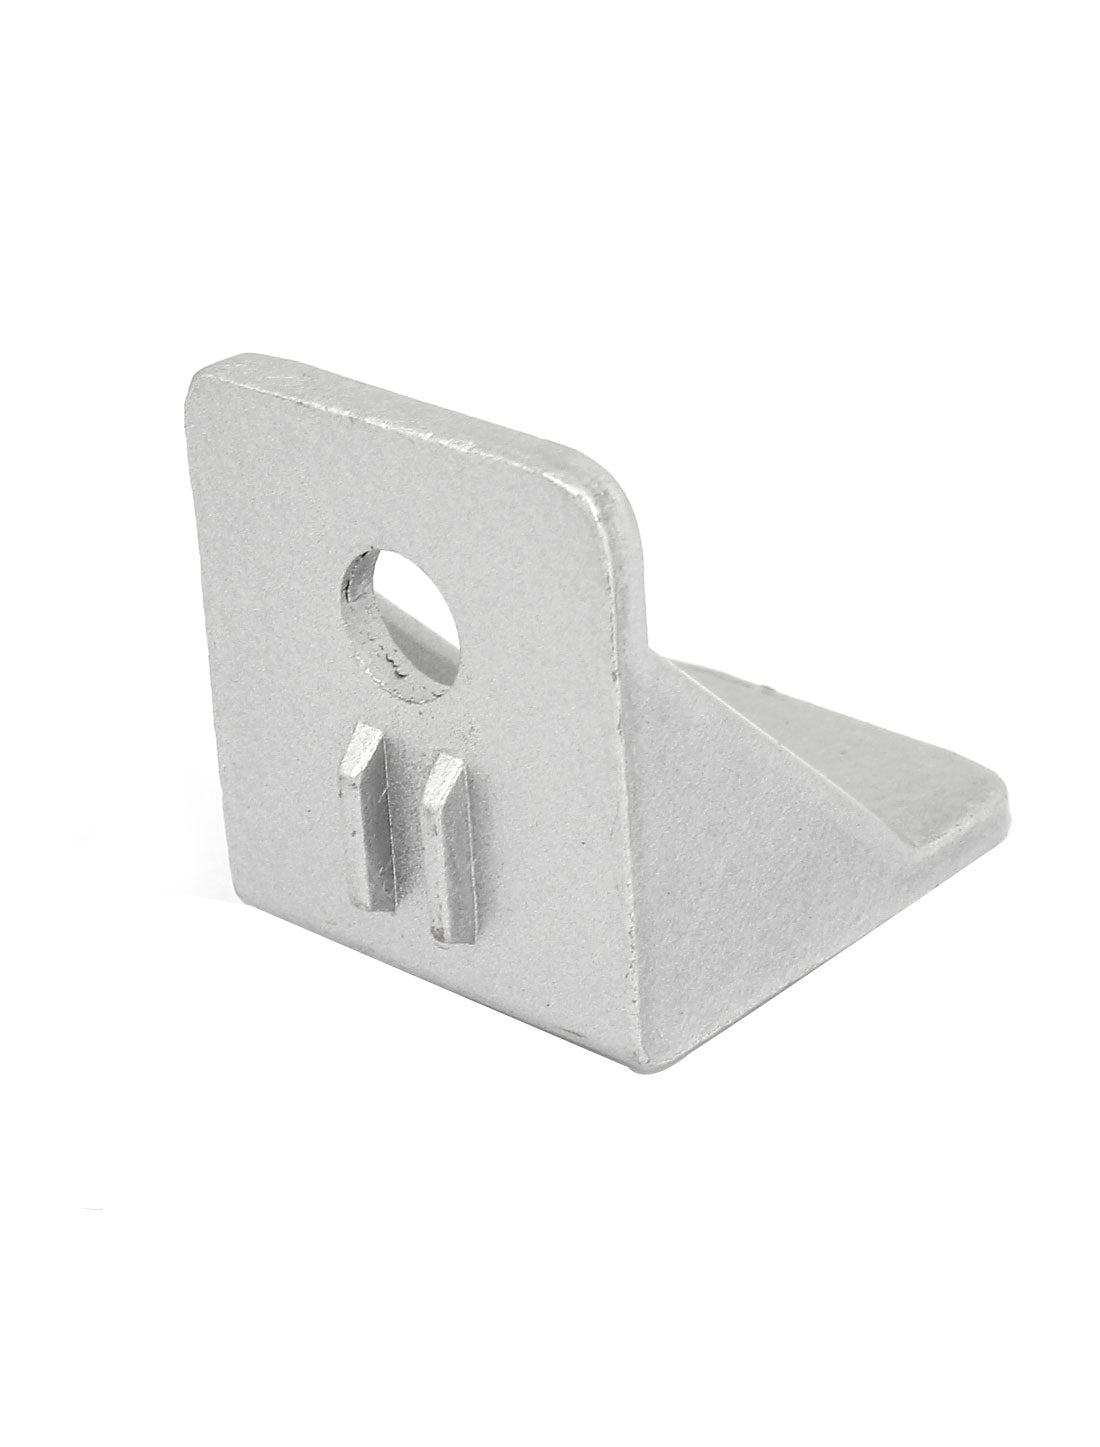 Uxcell Uxcell 2 Pcs 30mmx30mm Corner Brace Joint Right Angle Bracket Fastener